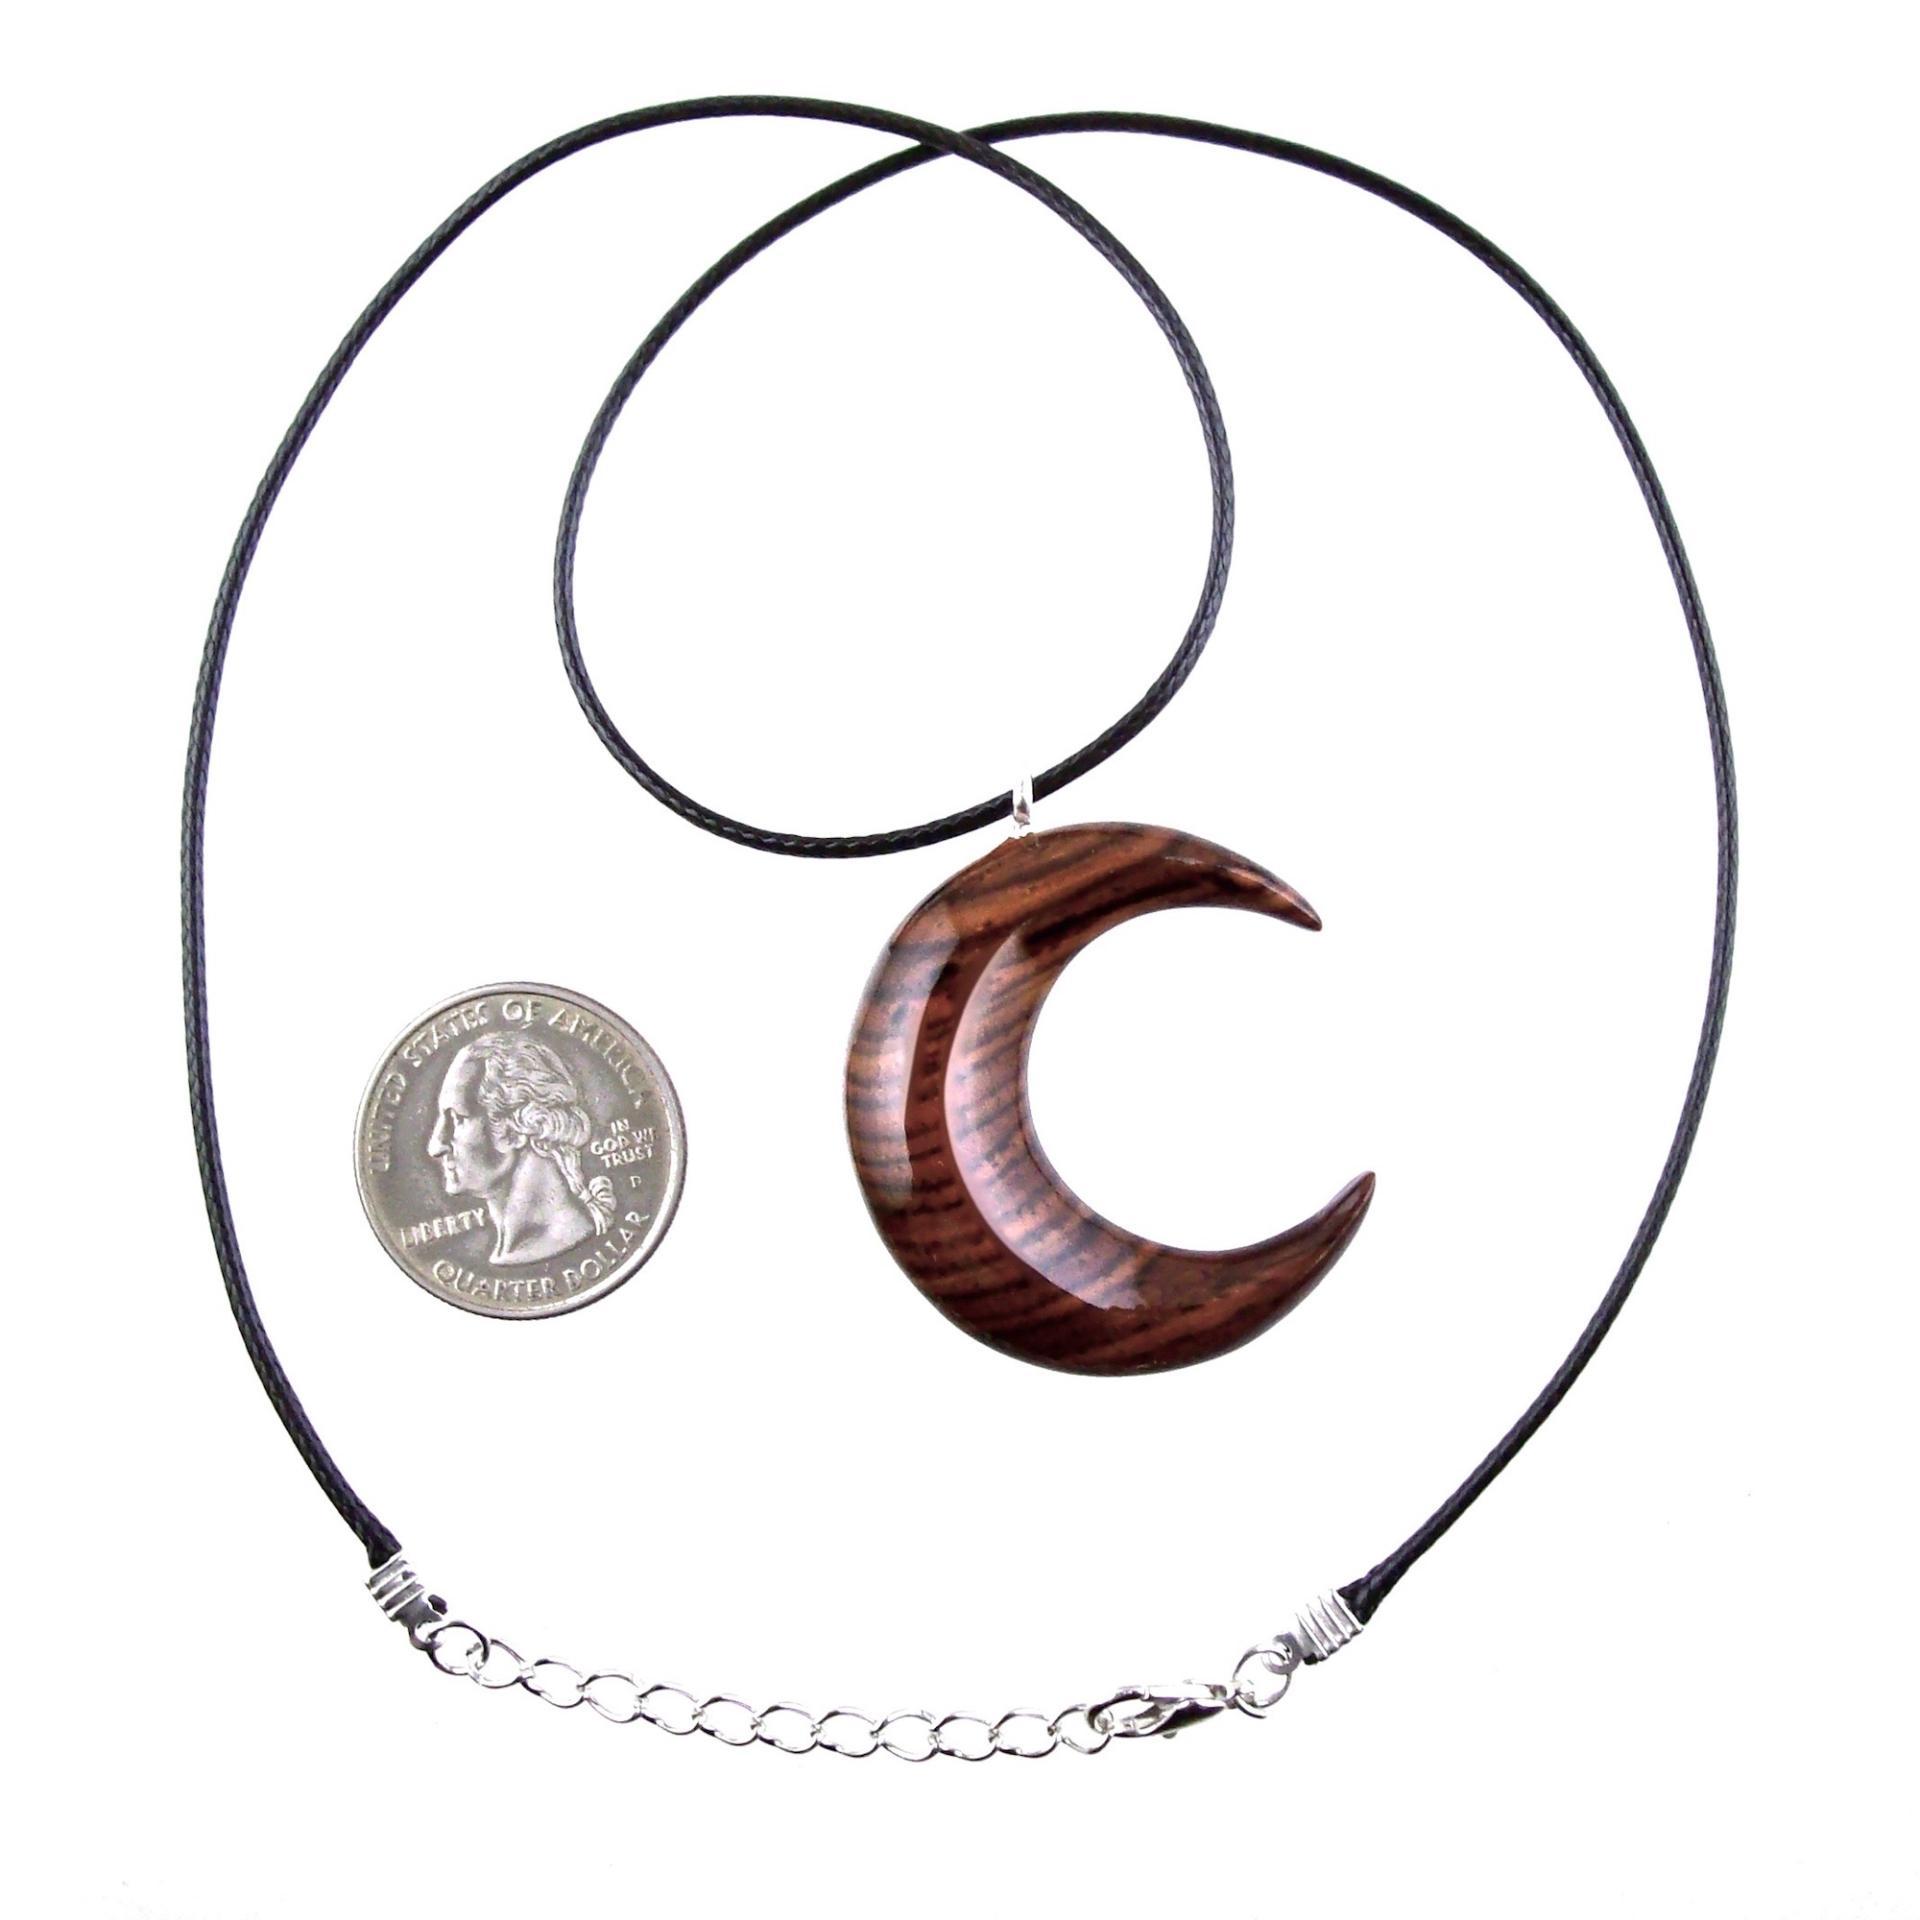 Hand Carved Wooden Crescent Moon Pendant Necklace, Handmade Celestial Wood Jewelry, One of a Kind Gift